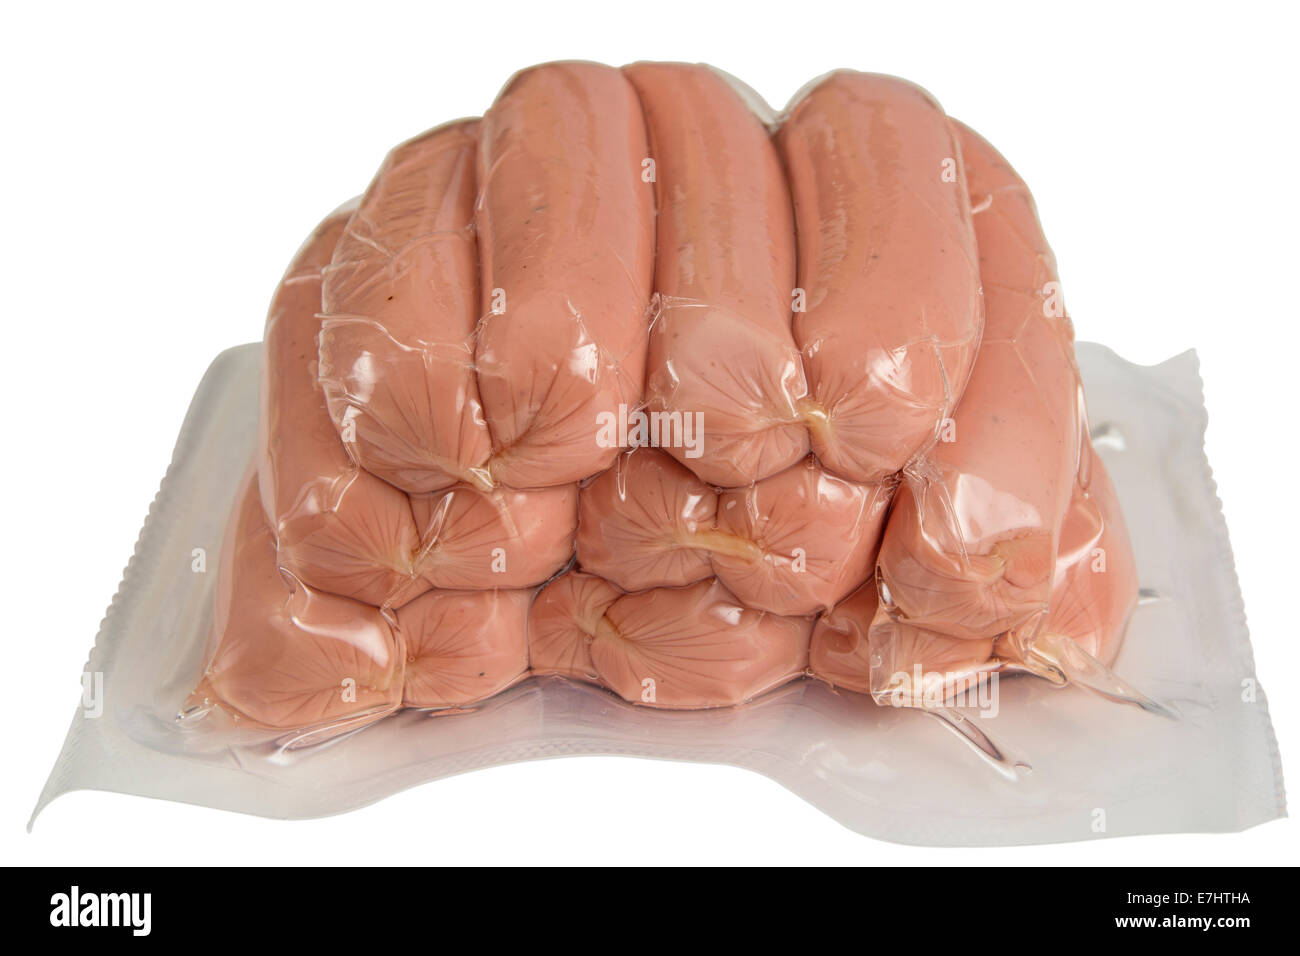 Pork sausage in plastic pack isolated on white with clipping path Stock Photo